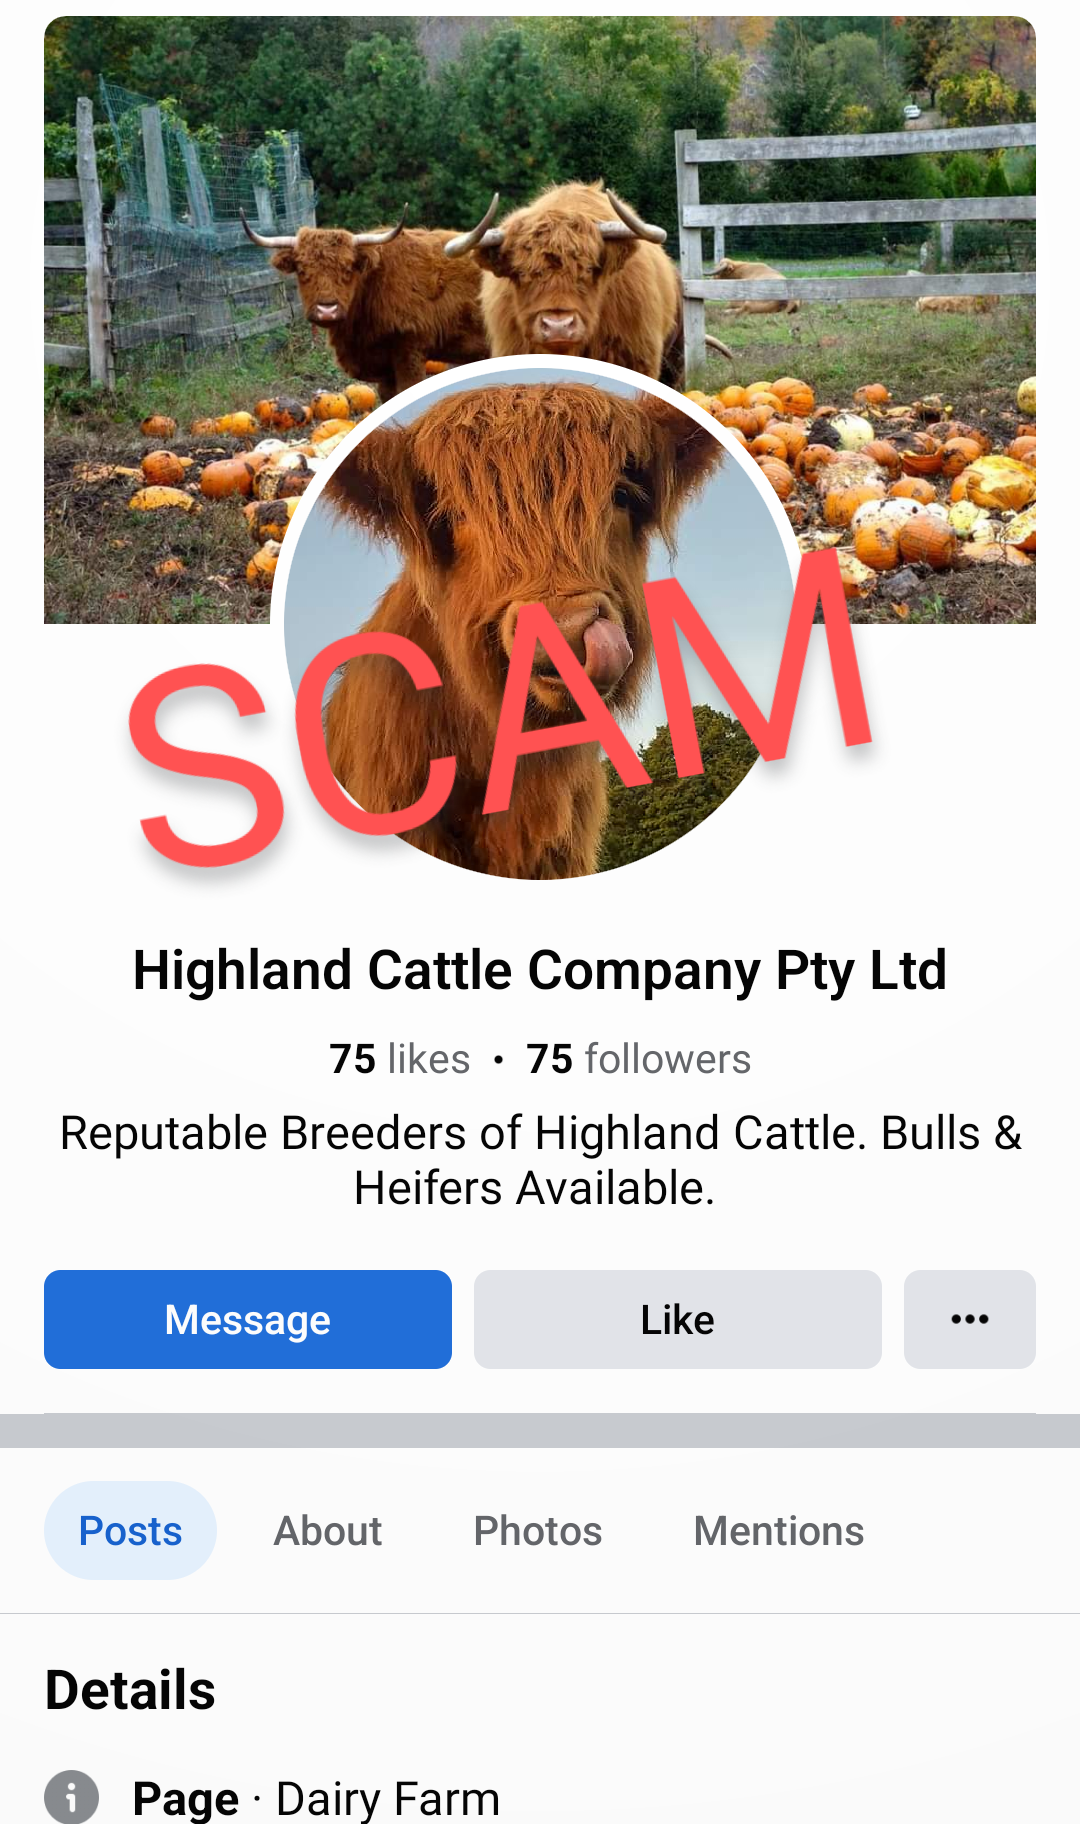 SCAM - Highland Cattle Company Pty Ltd